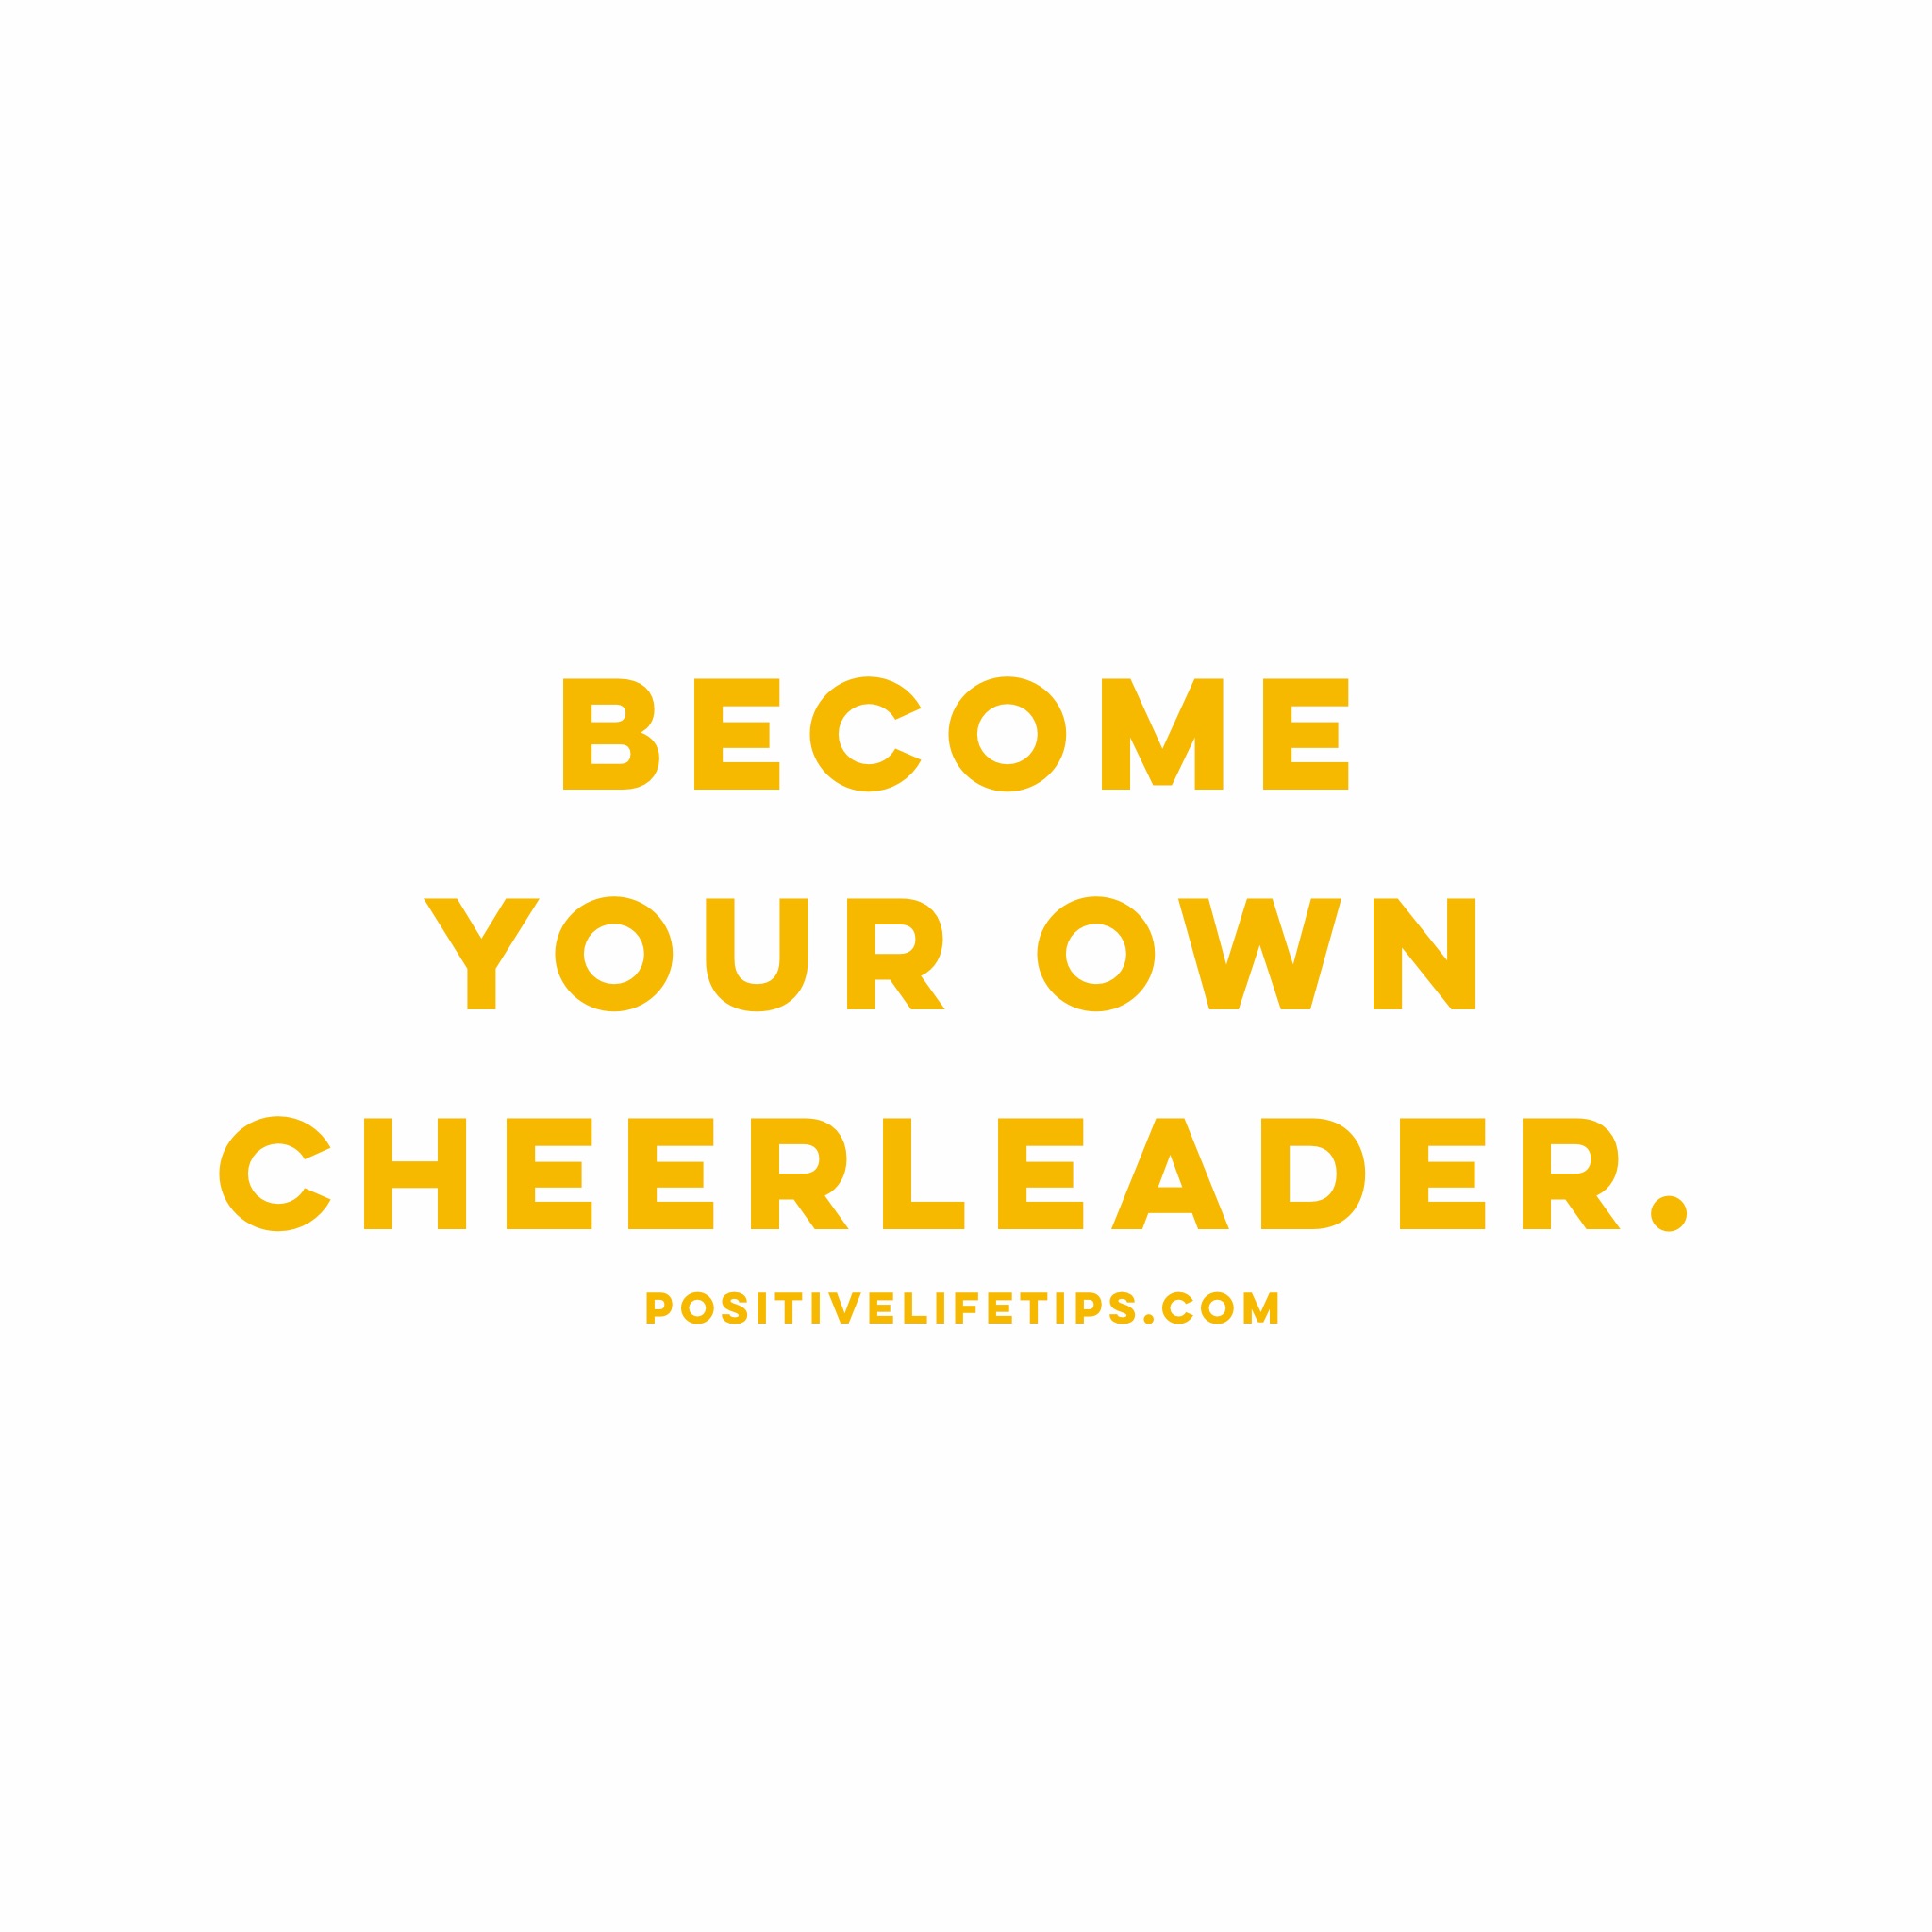 Why I became a cheerleader, and you should too!